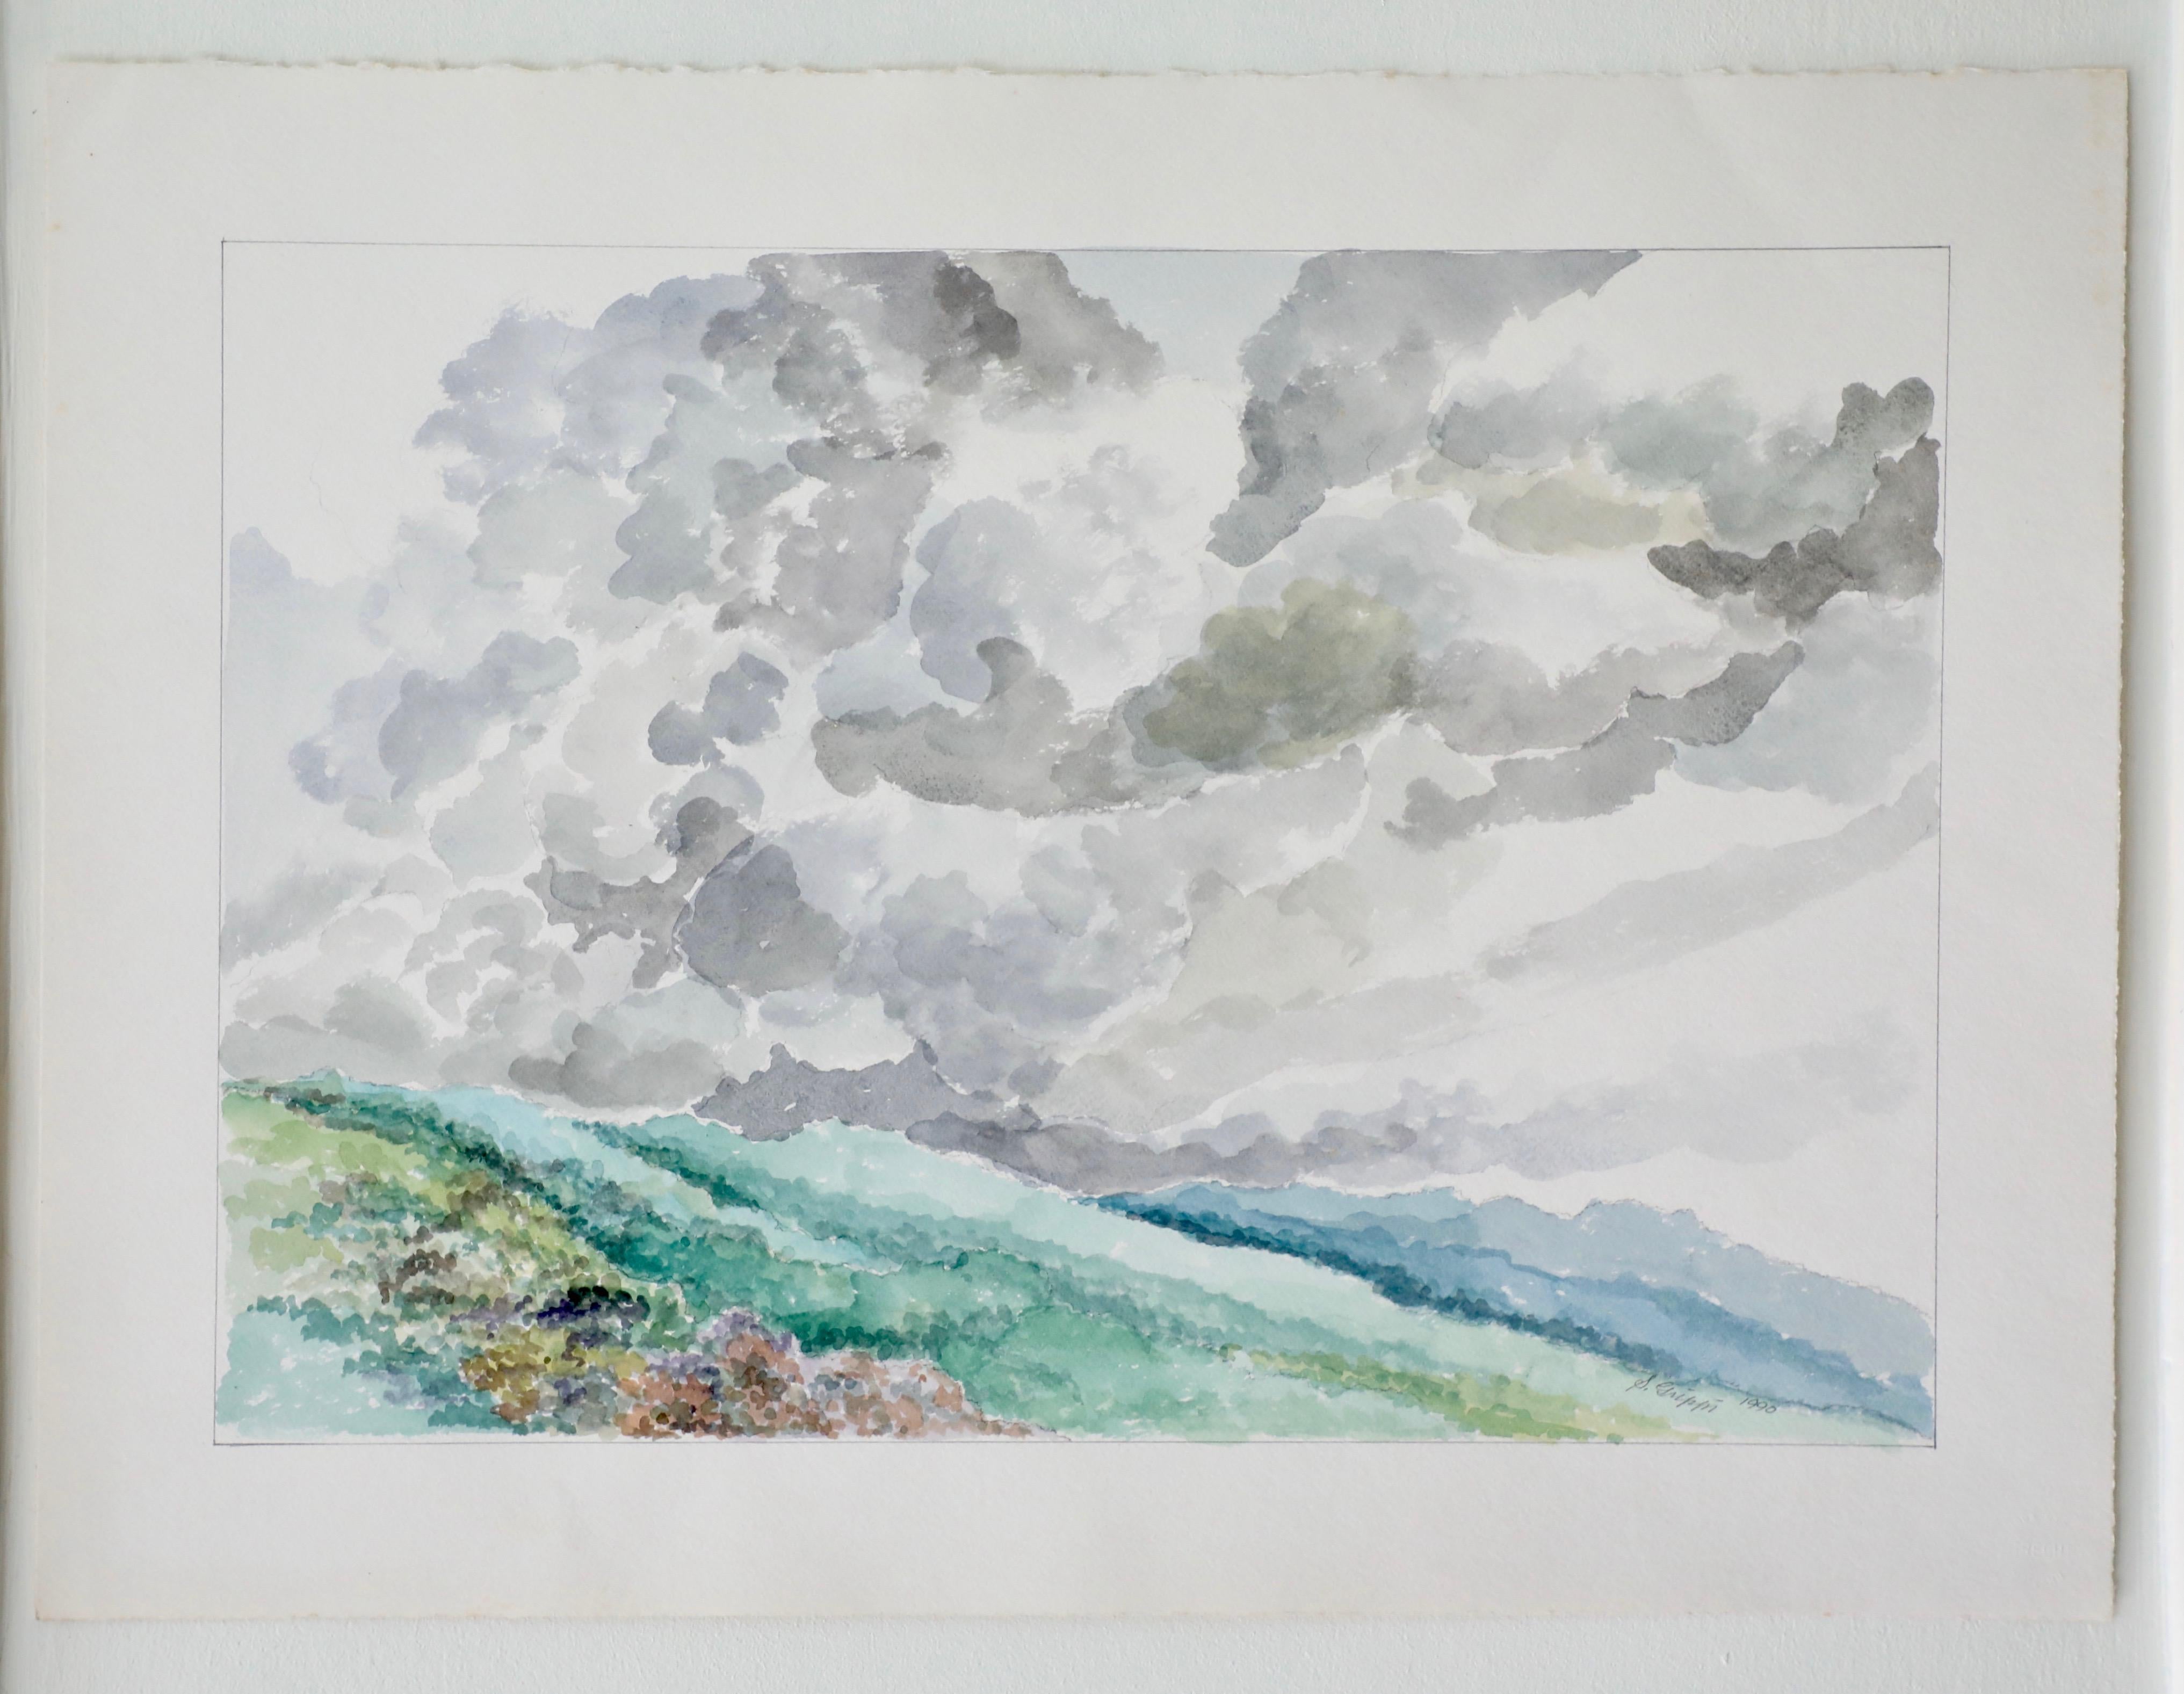 Watercolor and Pencil Landscape - Gray Abstract Drawing by Salvatore Grippi